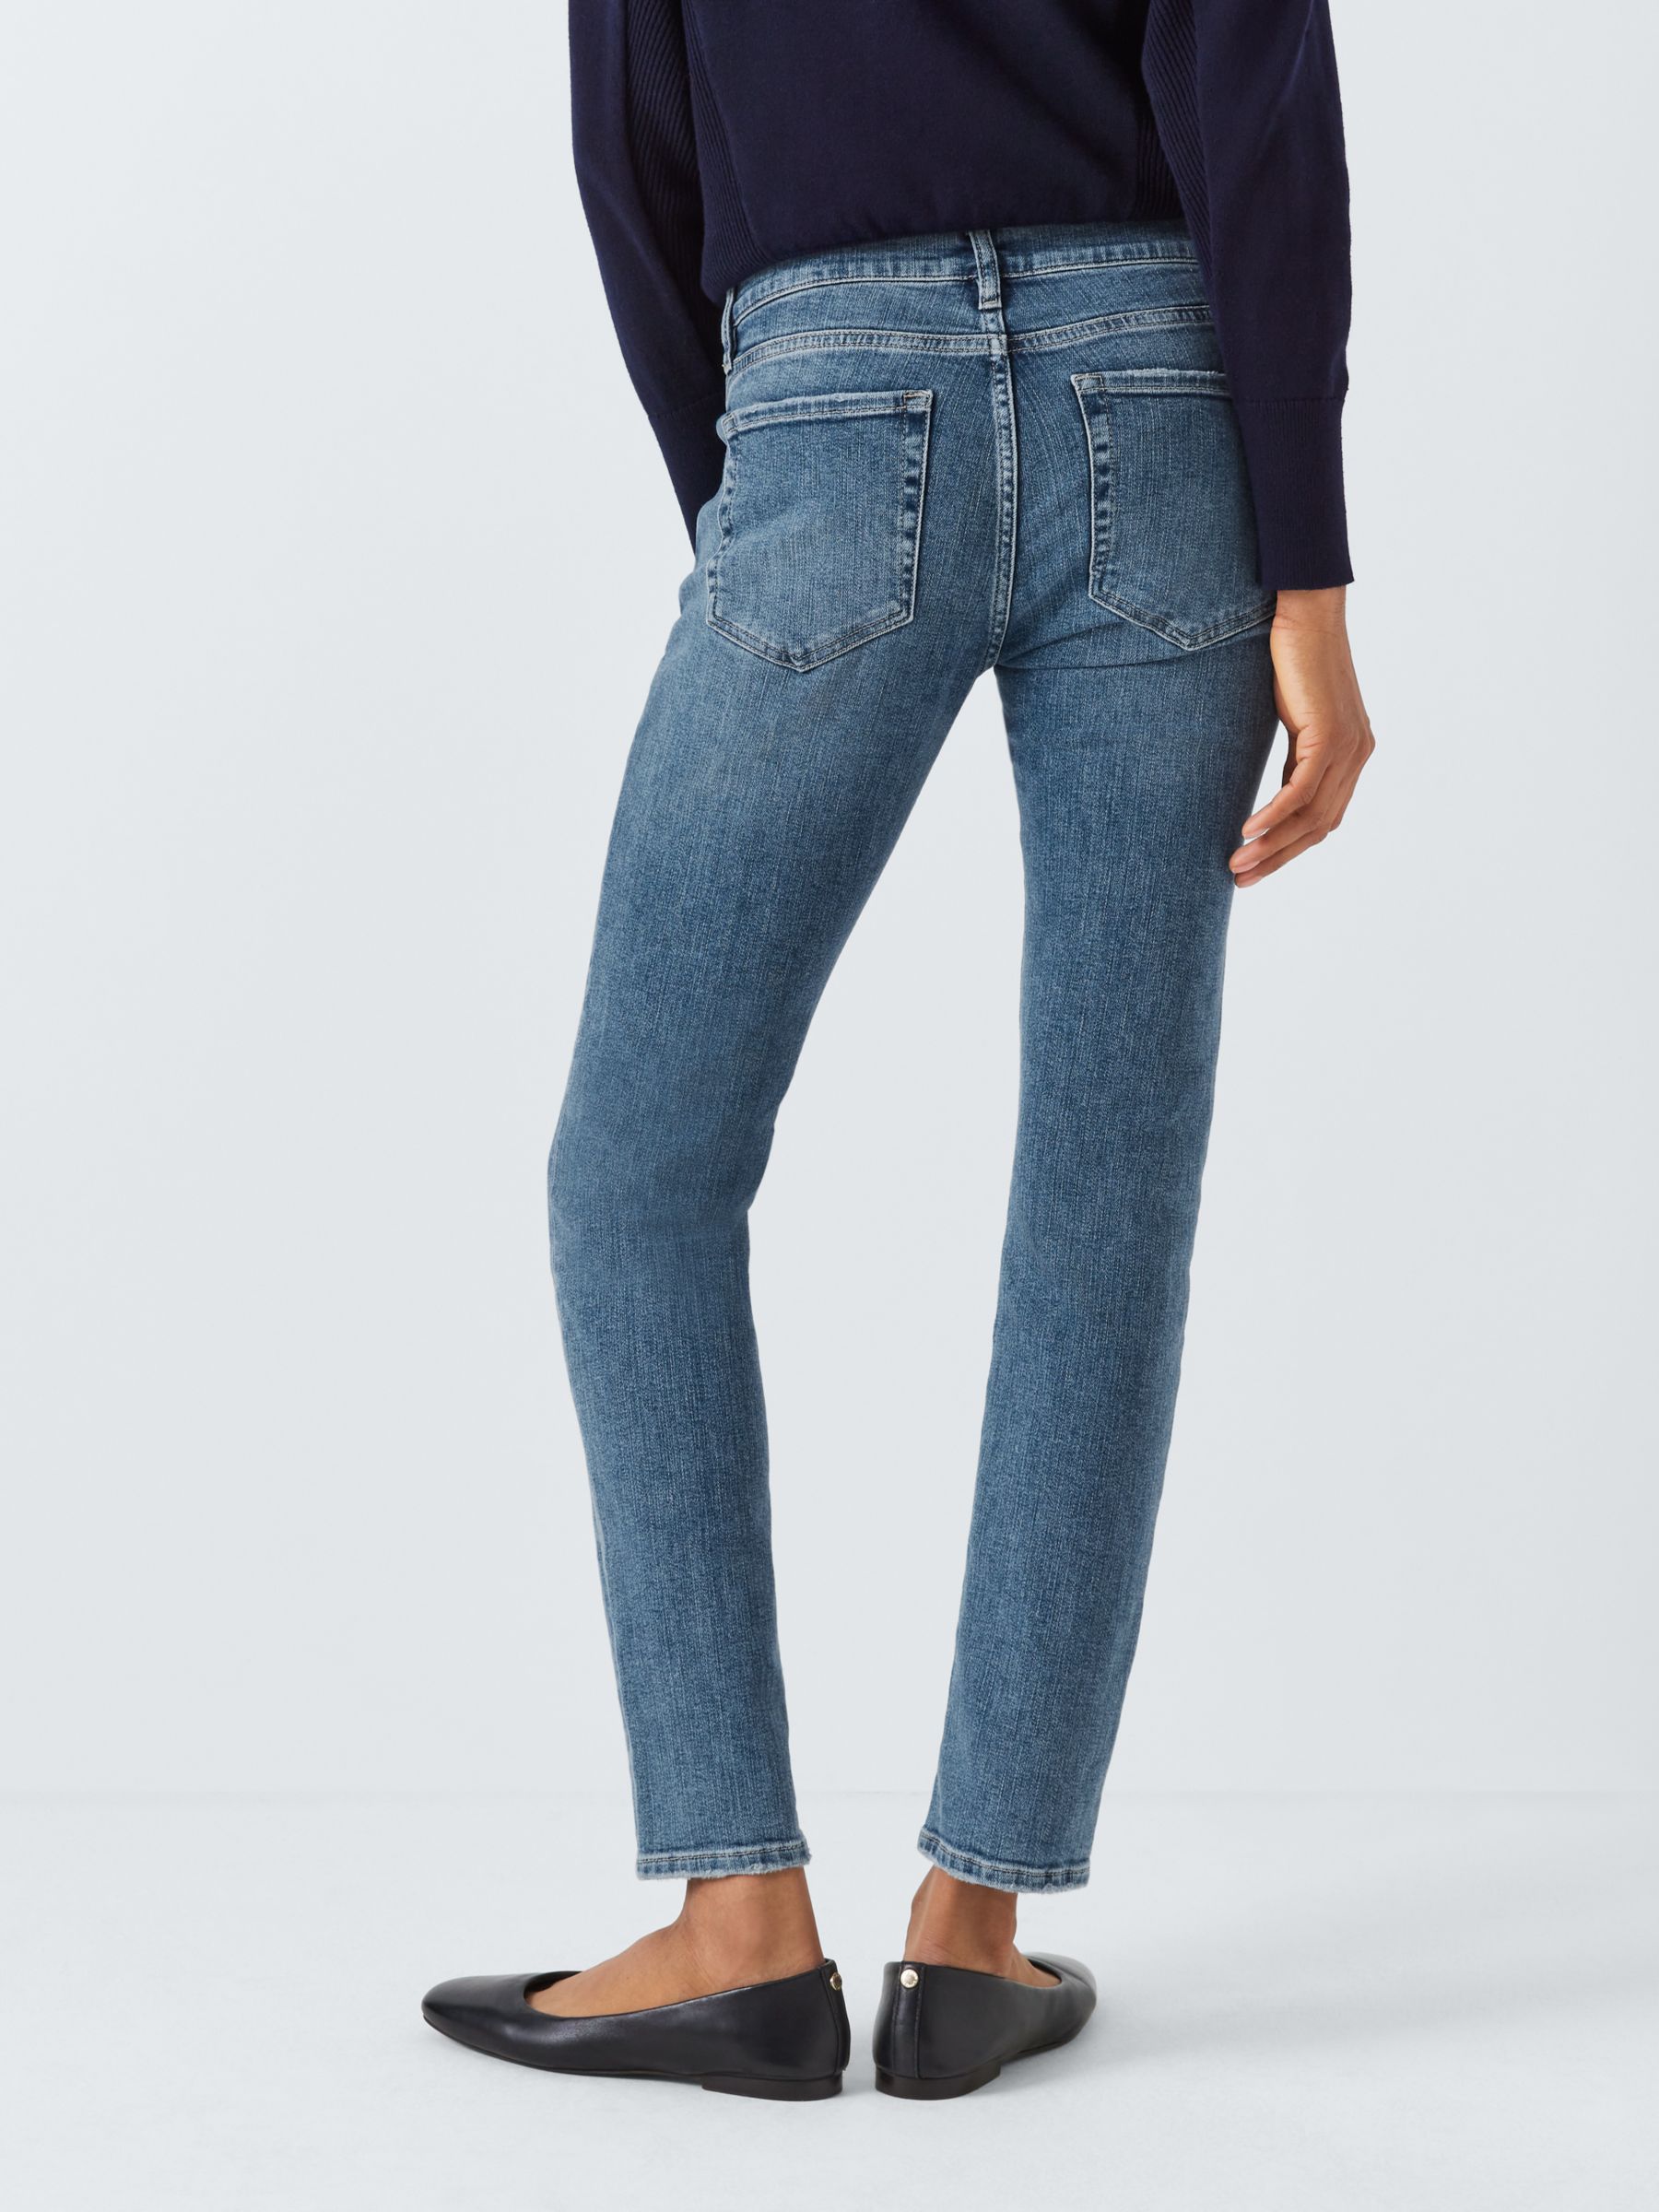 FRAME Le Garcon Tapered Jeans, Mid Blue at John Lewis & Partners